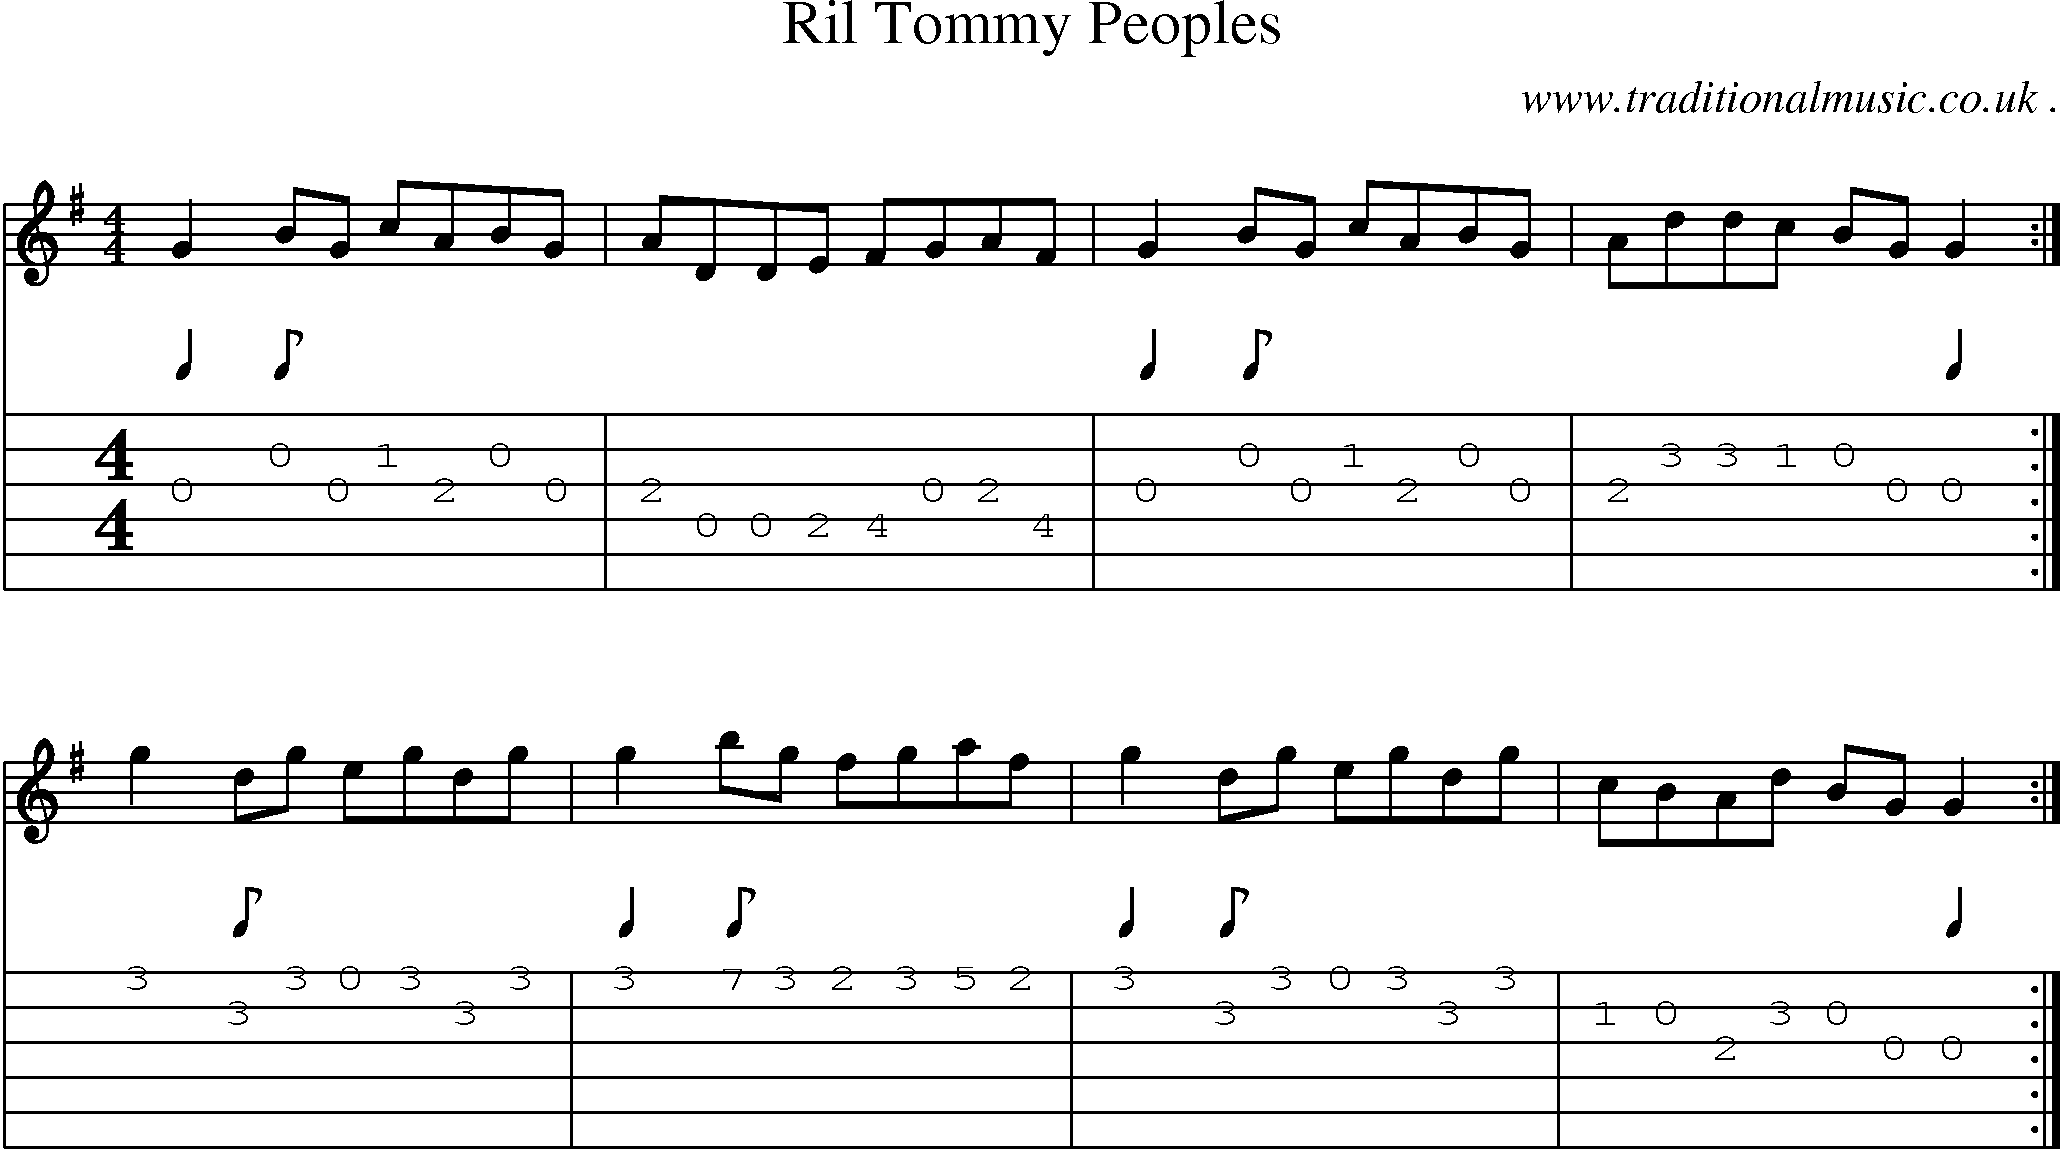 Sheet-Music and Guitar Tabs for Ril Tommy Peoples